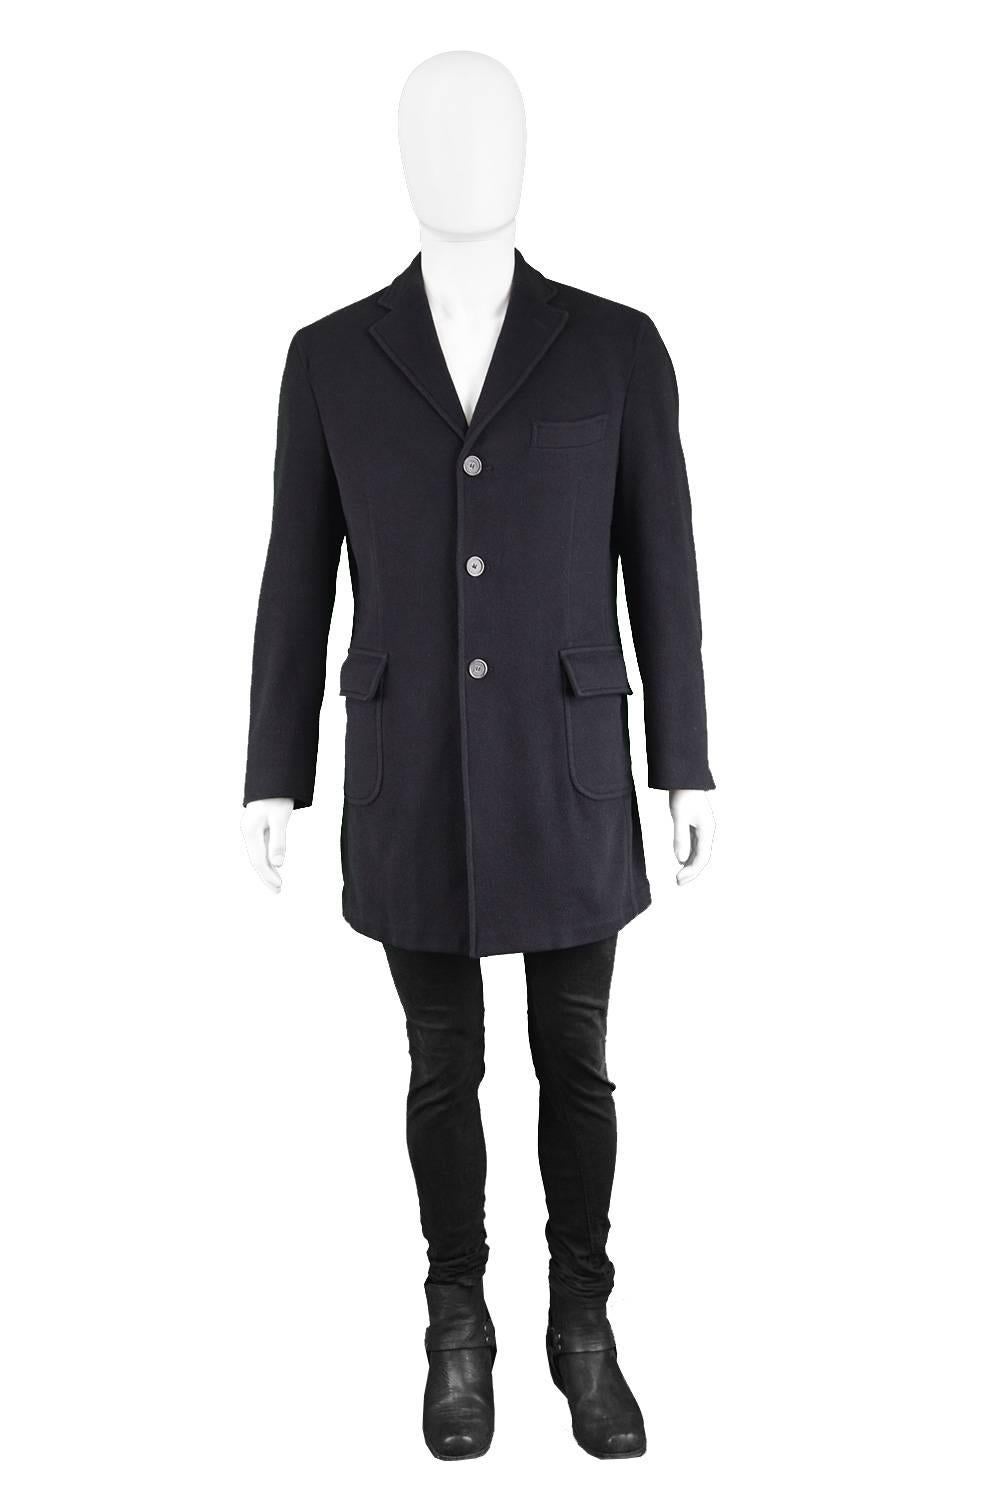 Enrico Coveri Men's Vintage 1990s Black Wool & Cashmere Hand Finished Over Coat

Size: Marked 50R which is roughly a men's Medium. Please check measurements.
Chest - 42” / 106cm (allow a couple of inches room for movement)
Waist - 36” / 91cm
Length